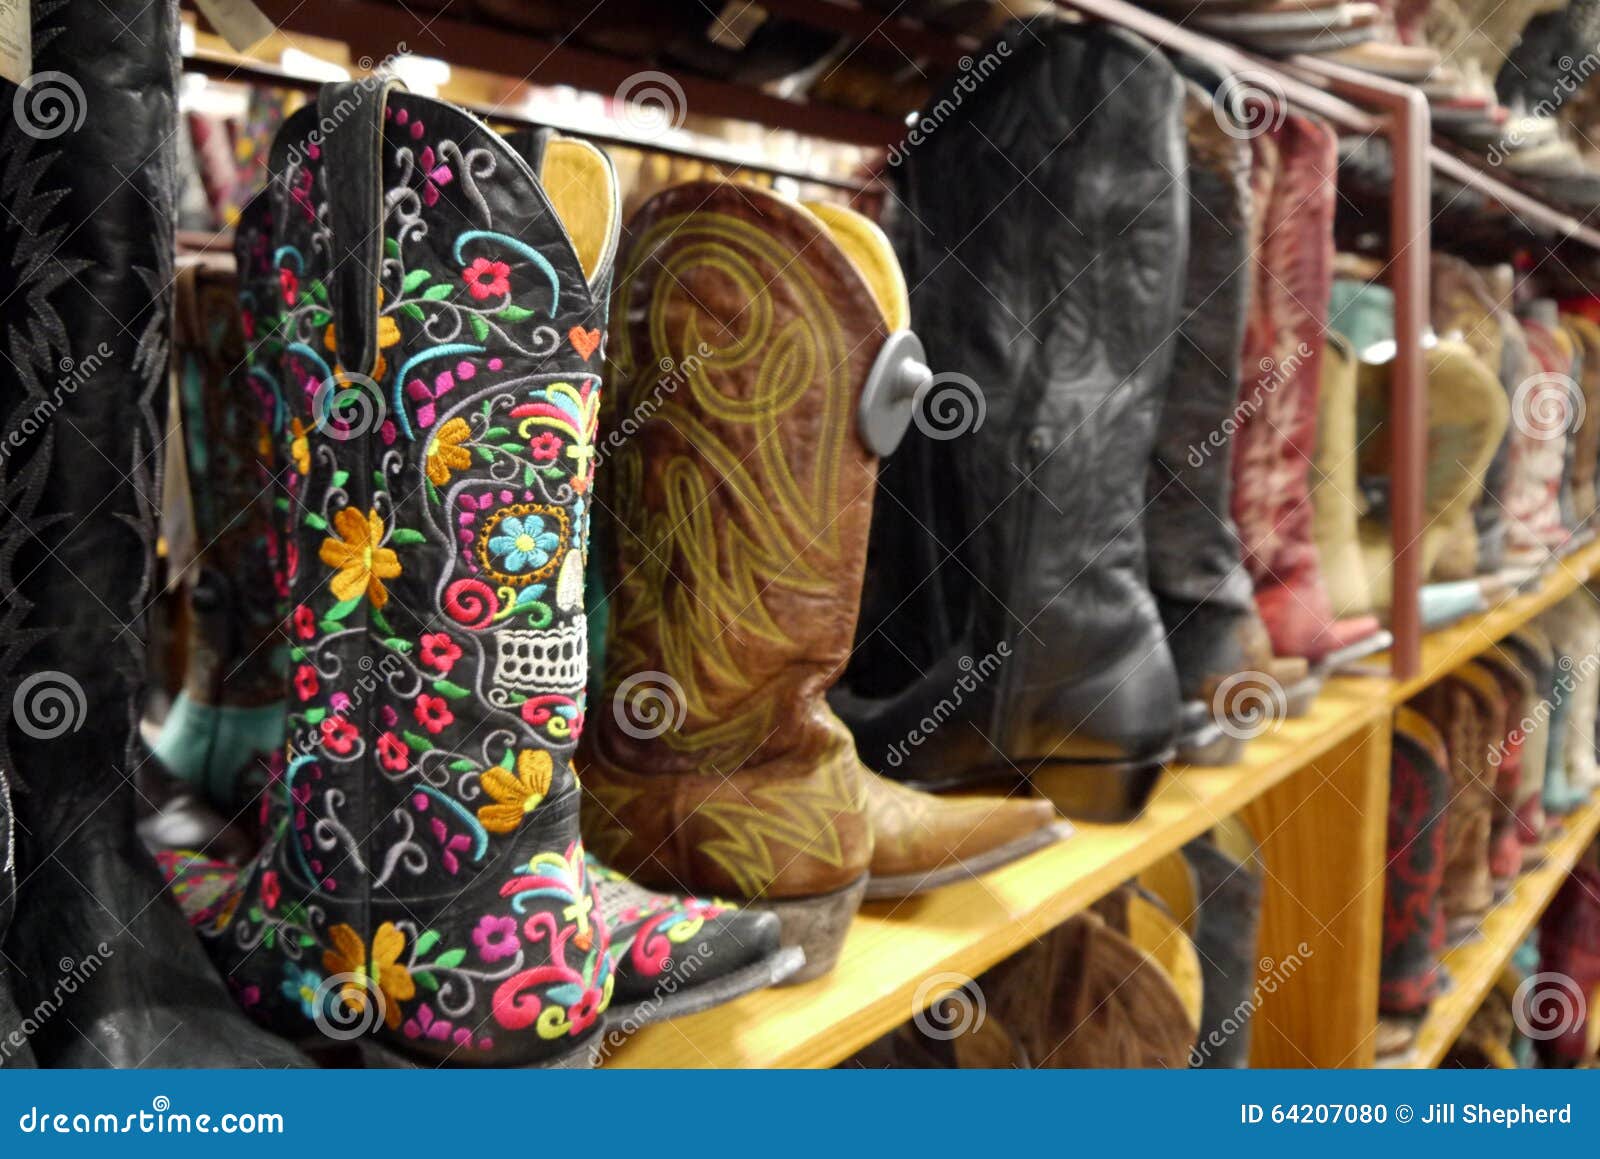 Cowboy Boots: Mexican Embroidery Stock 